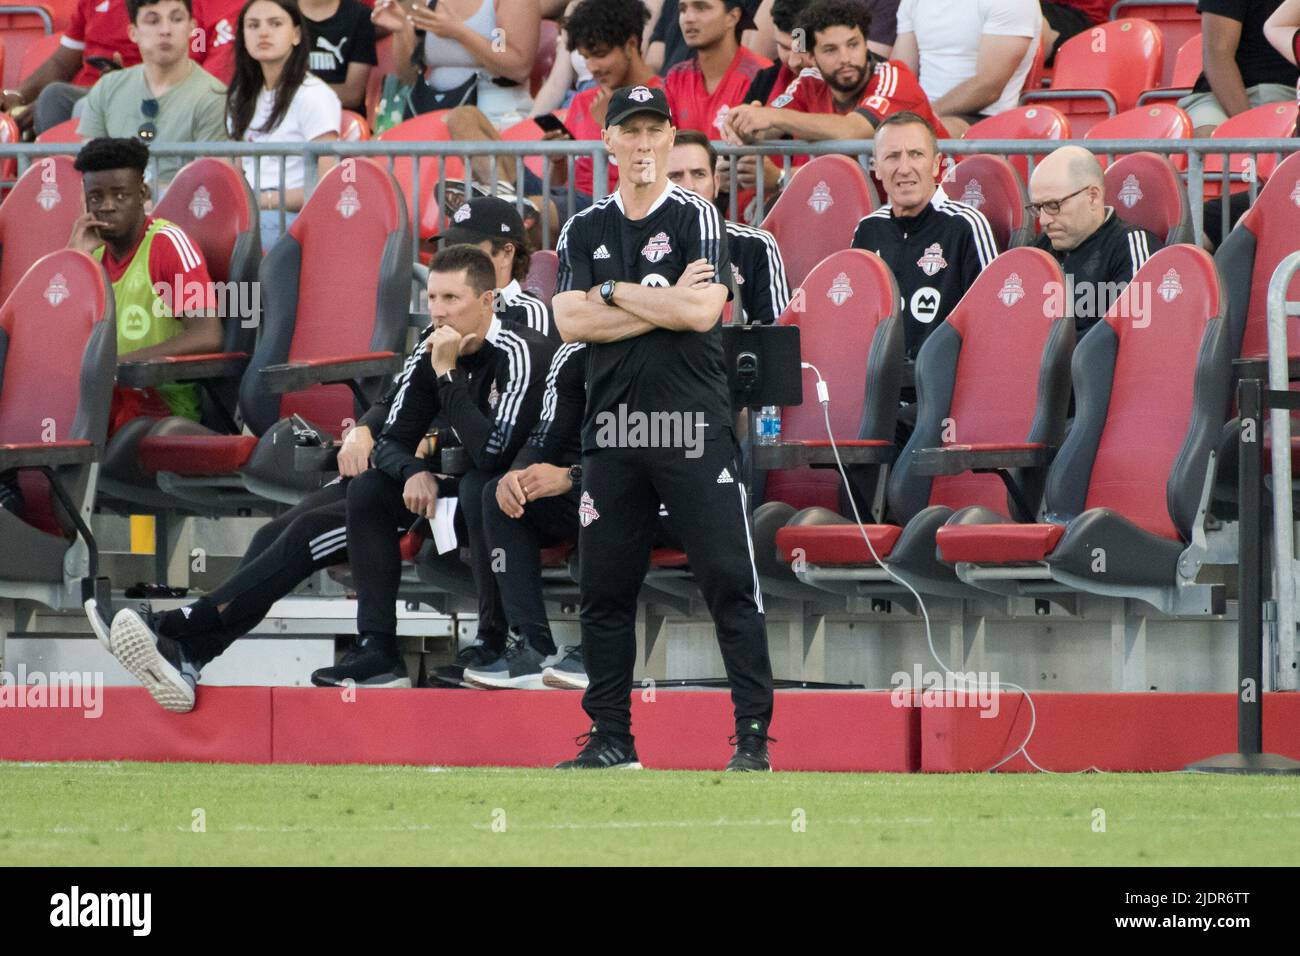 Toronto, Canada. 22nd June, 2022. TFC coach of Toronto Bob Bradley (Robert Frank Bradley) watches as his team plays during the Canadian Championship game between Toronto FC and CF Montreal at BMO Field. The game ended 4-0 for Toronto FC. Credit: SOPA Images Limited/Alamy Live News Stock Photo